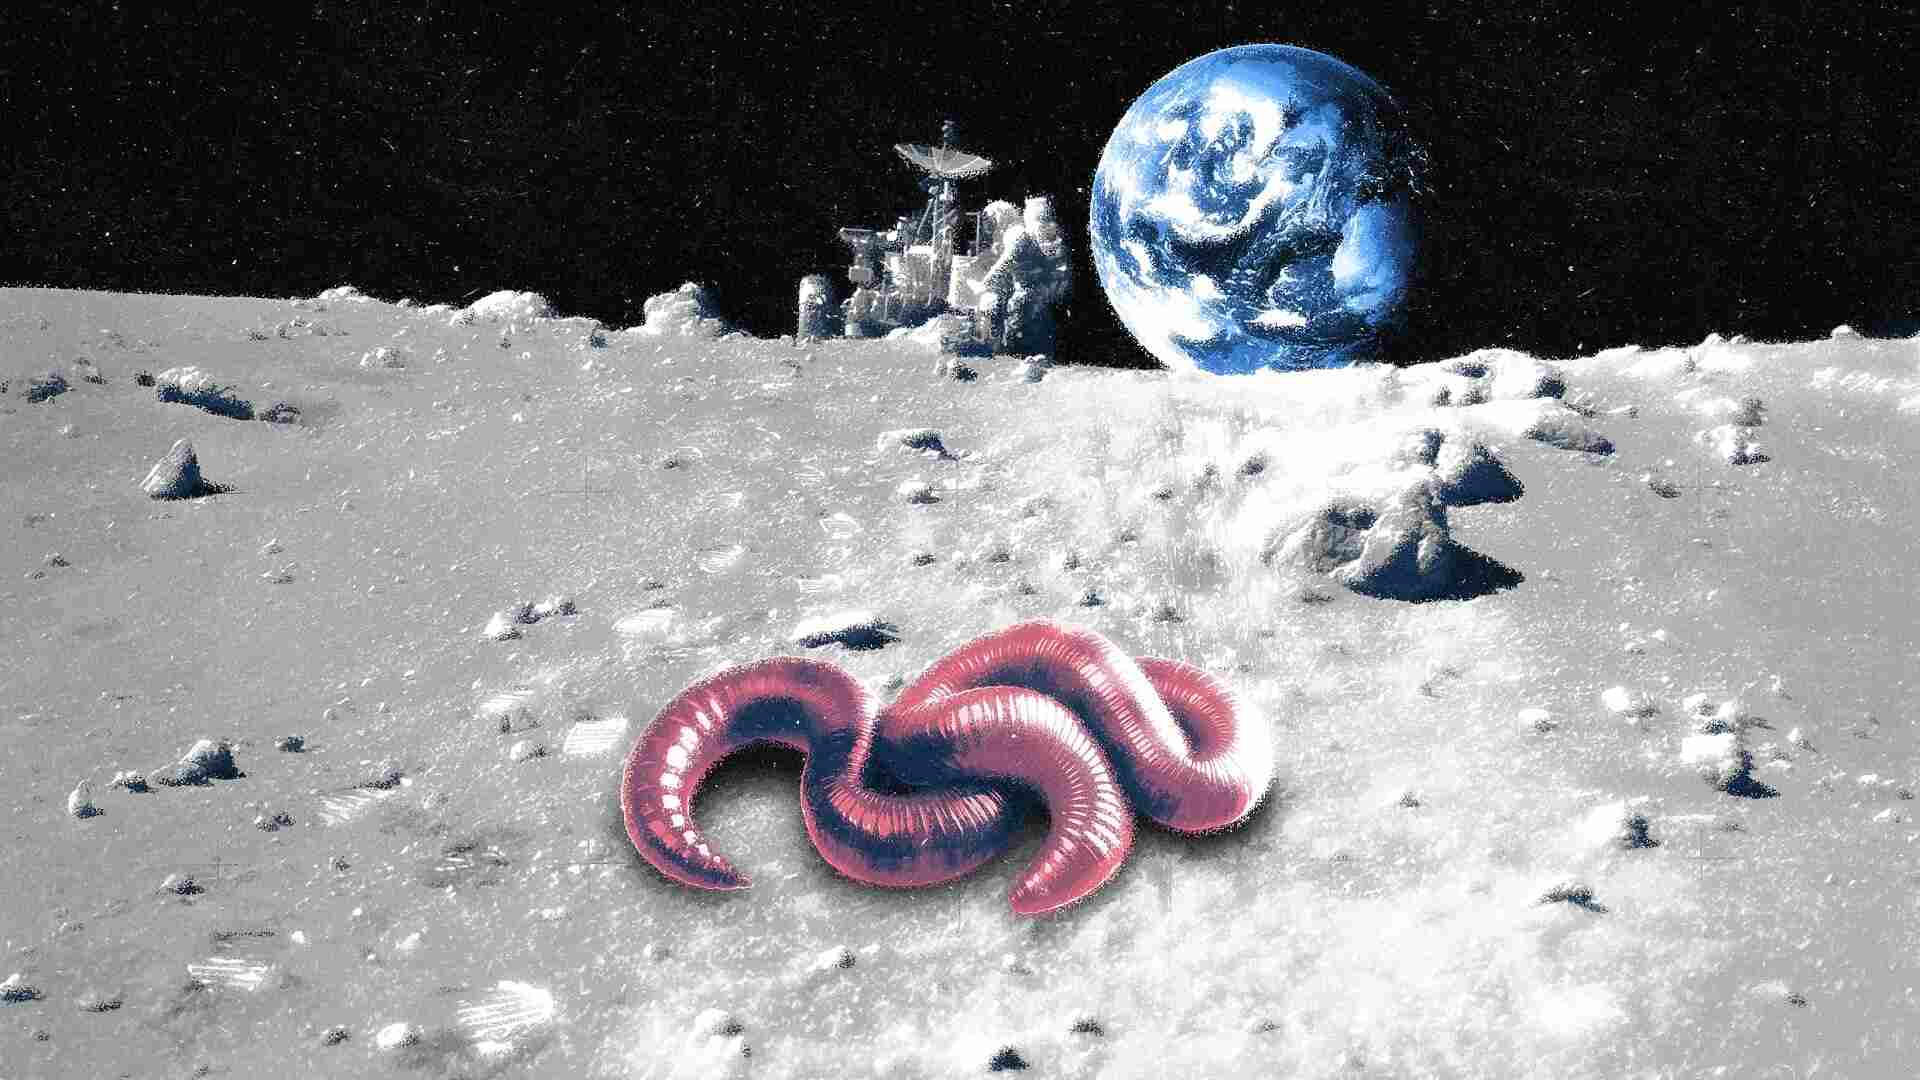 The solution to growing food in space? Worms